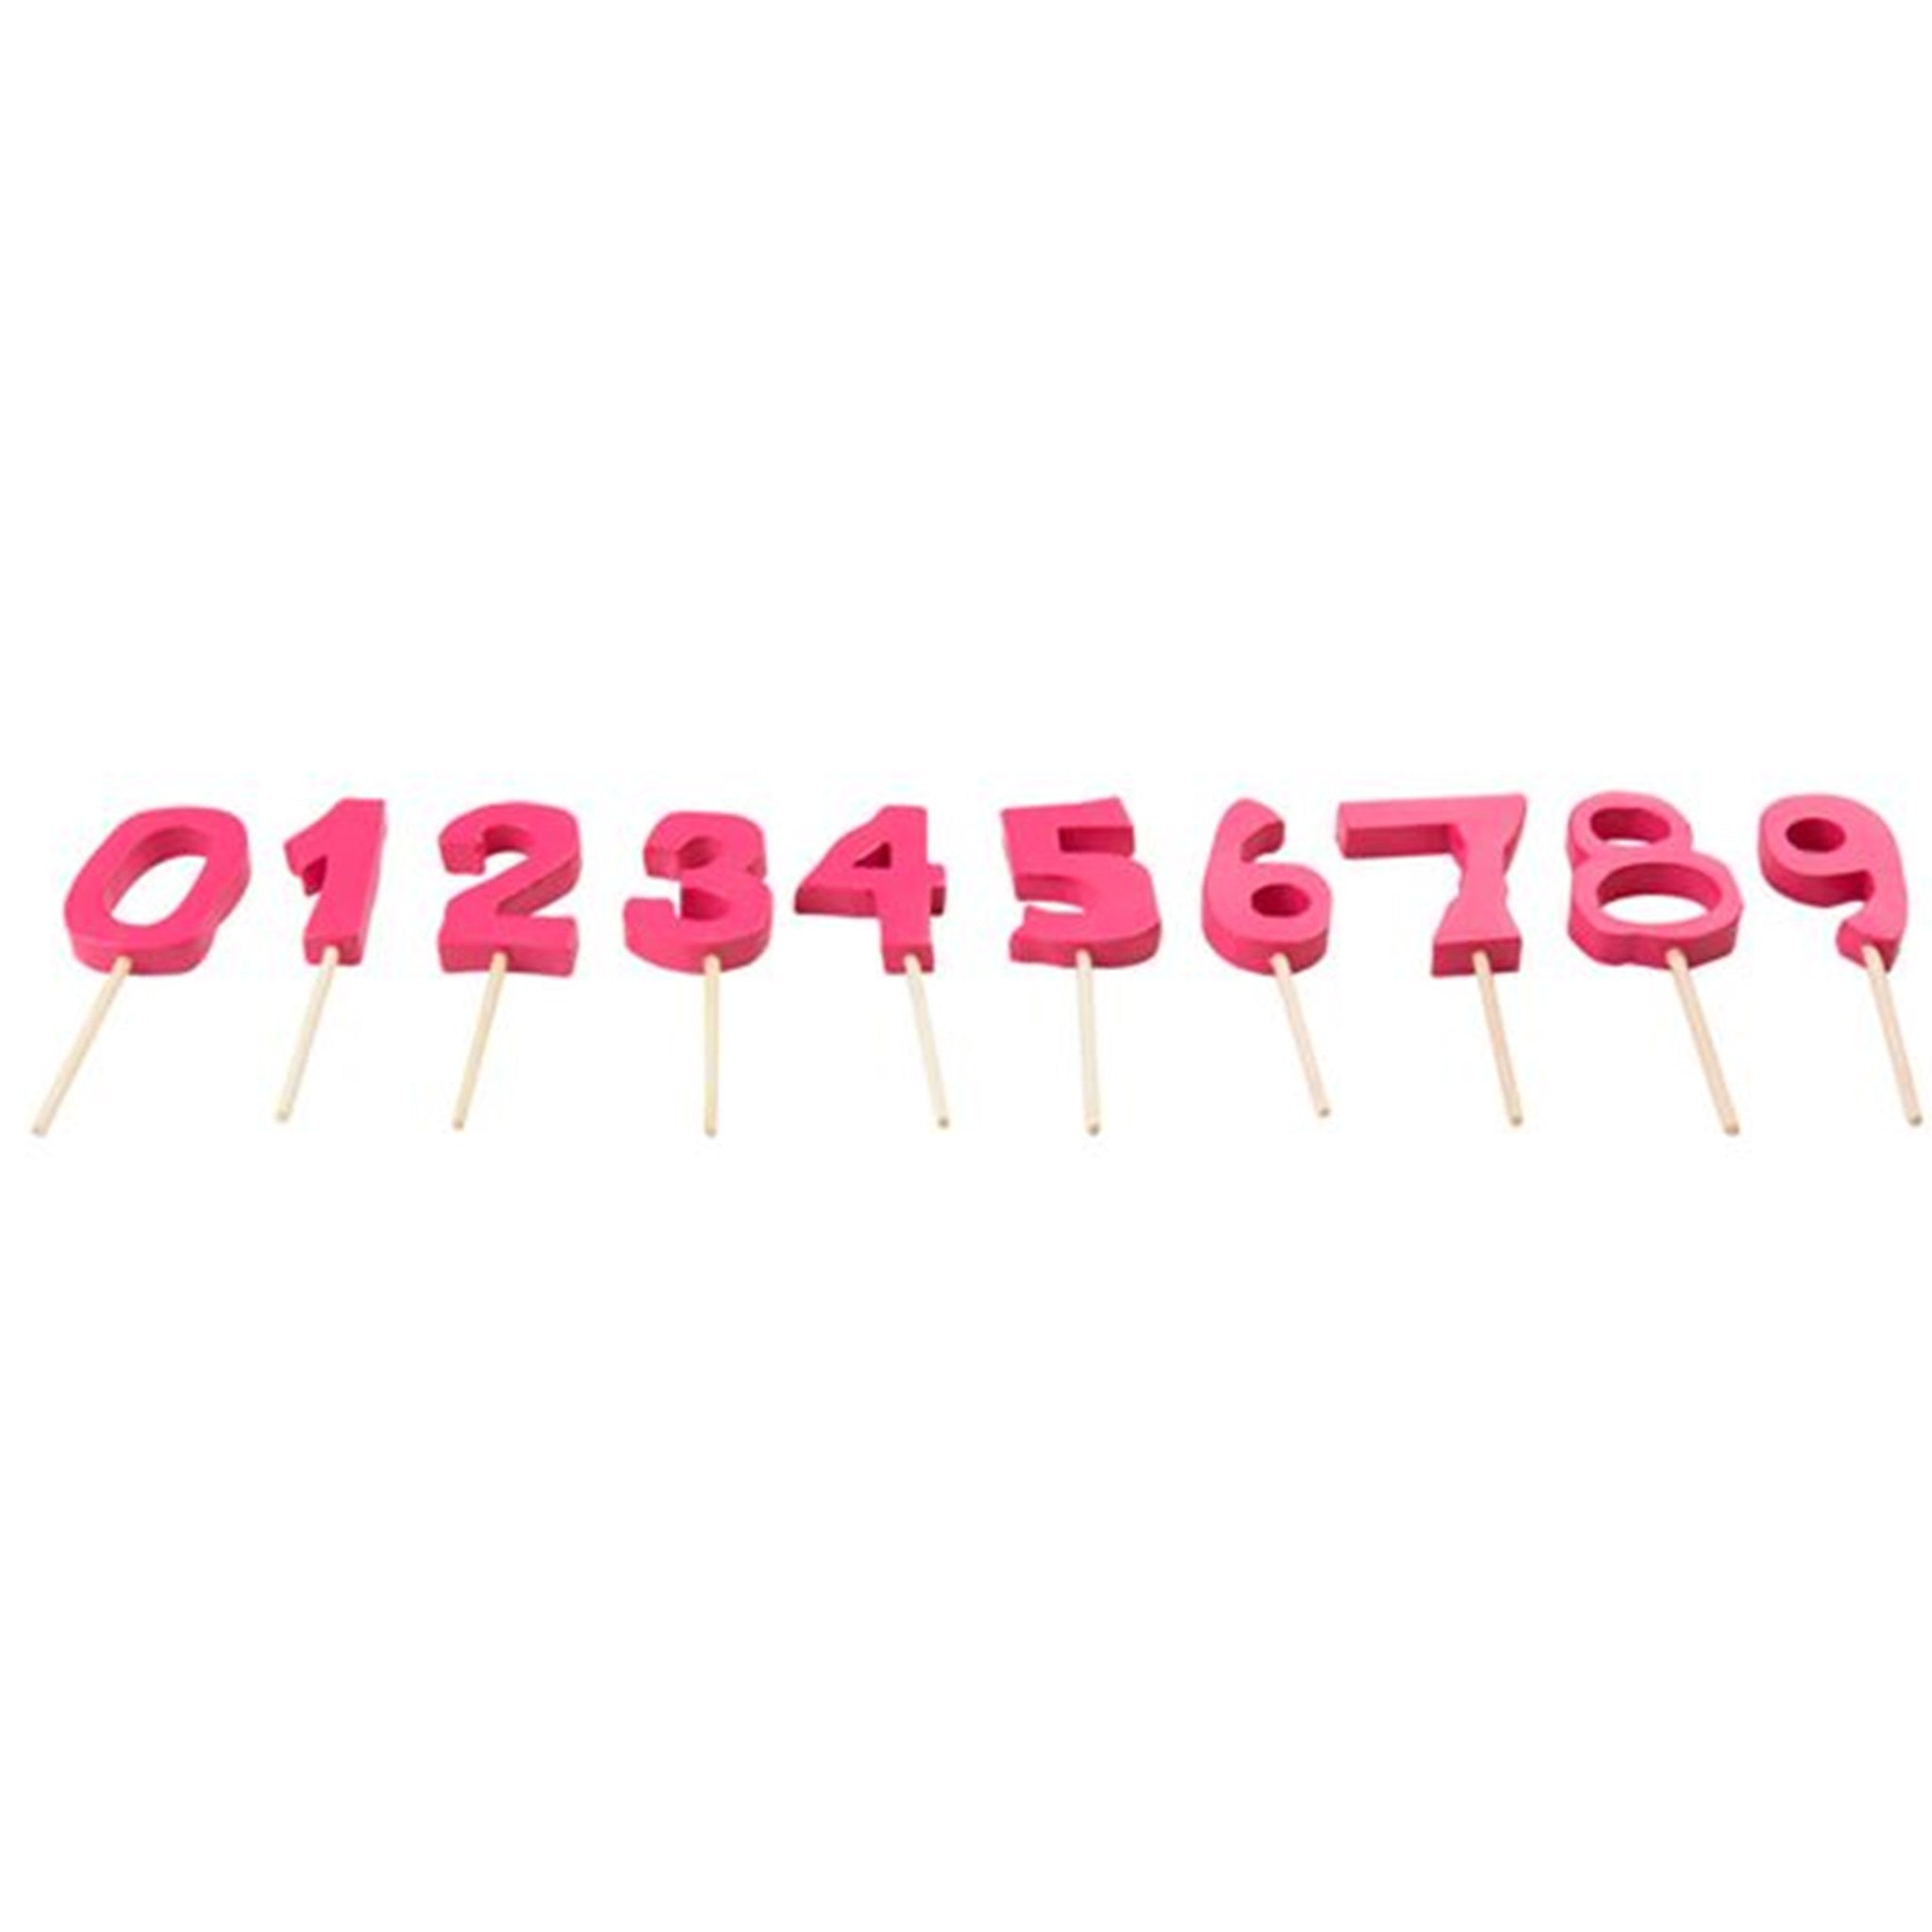 Kids by Friis Birthday Cake Numbers Pink